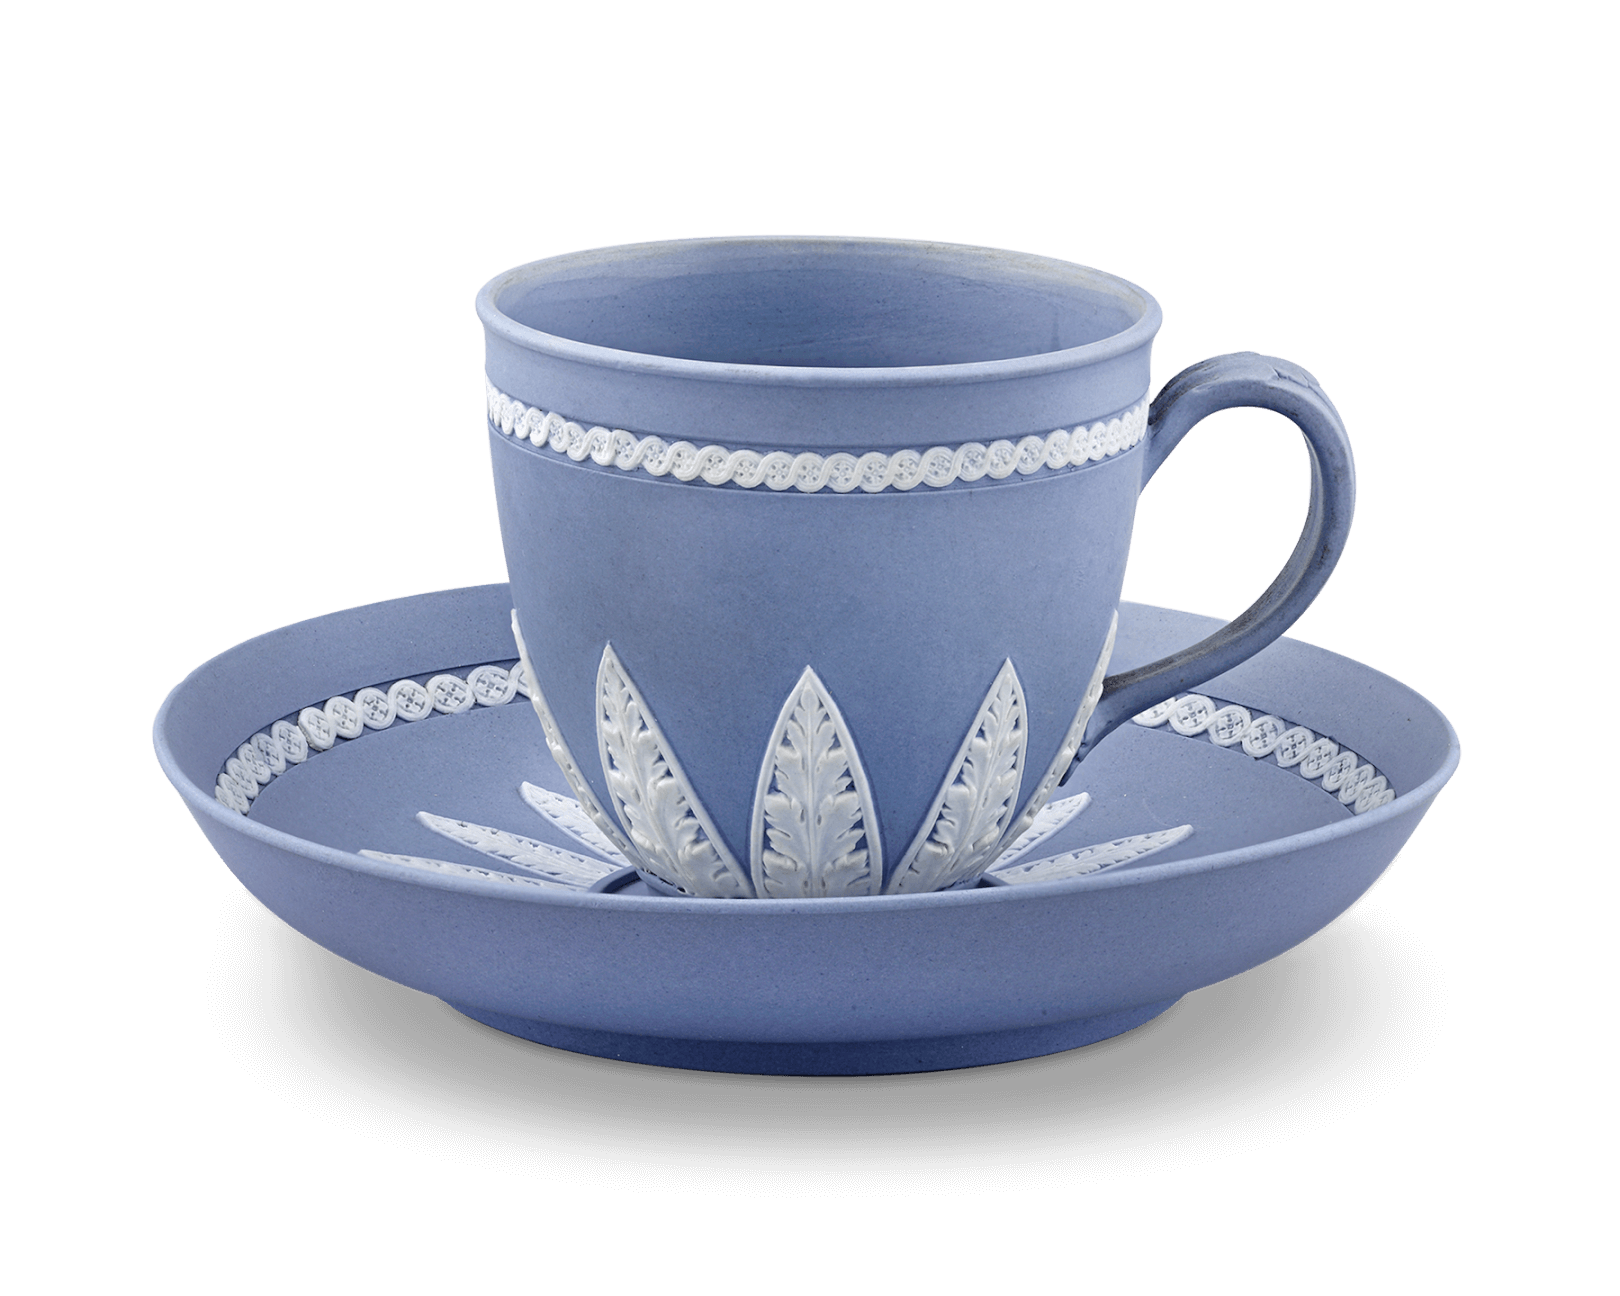 Wedgwood Pale Blue Jasperware Coffee Cup and Saucer